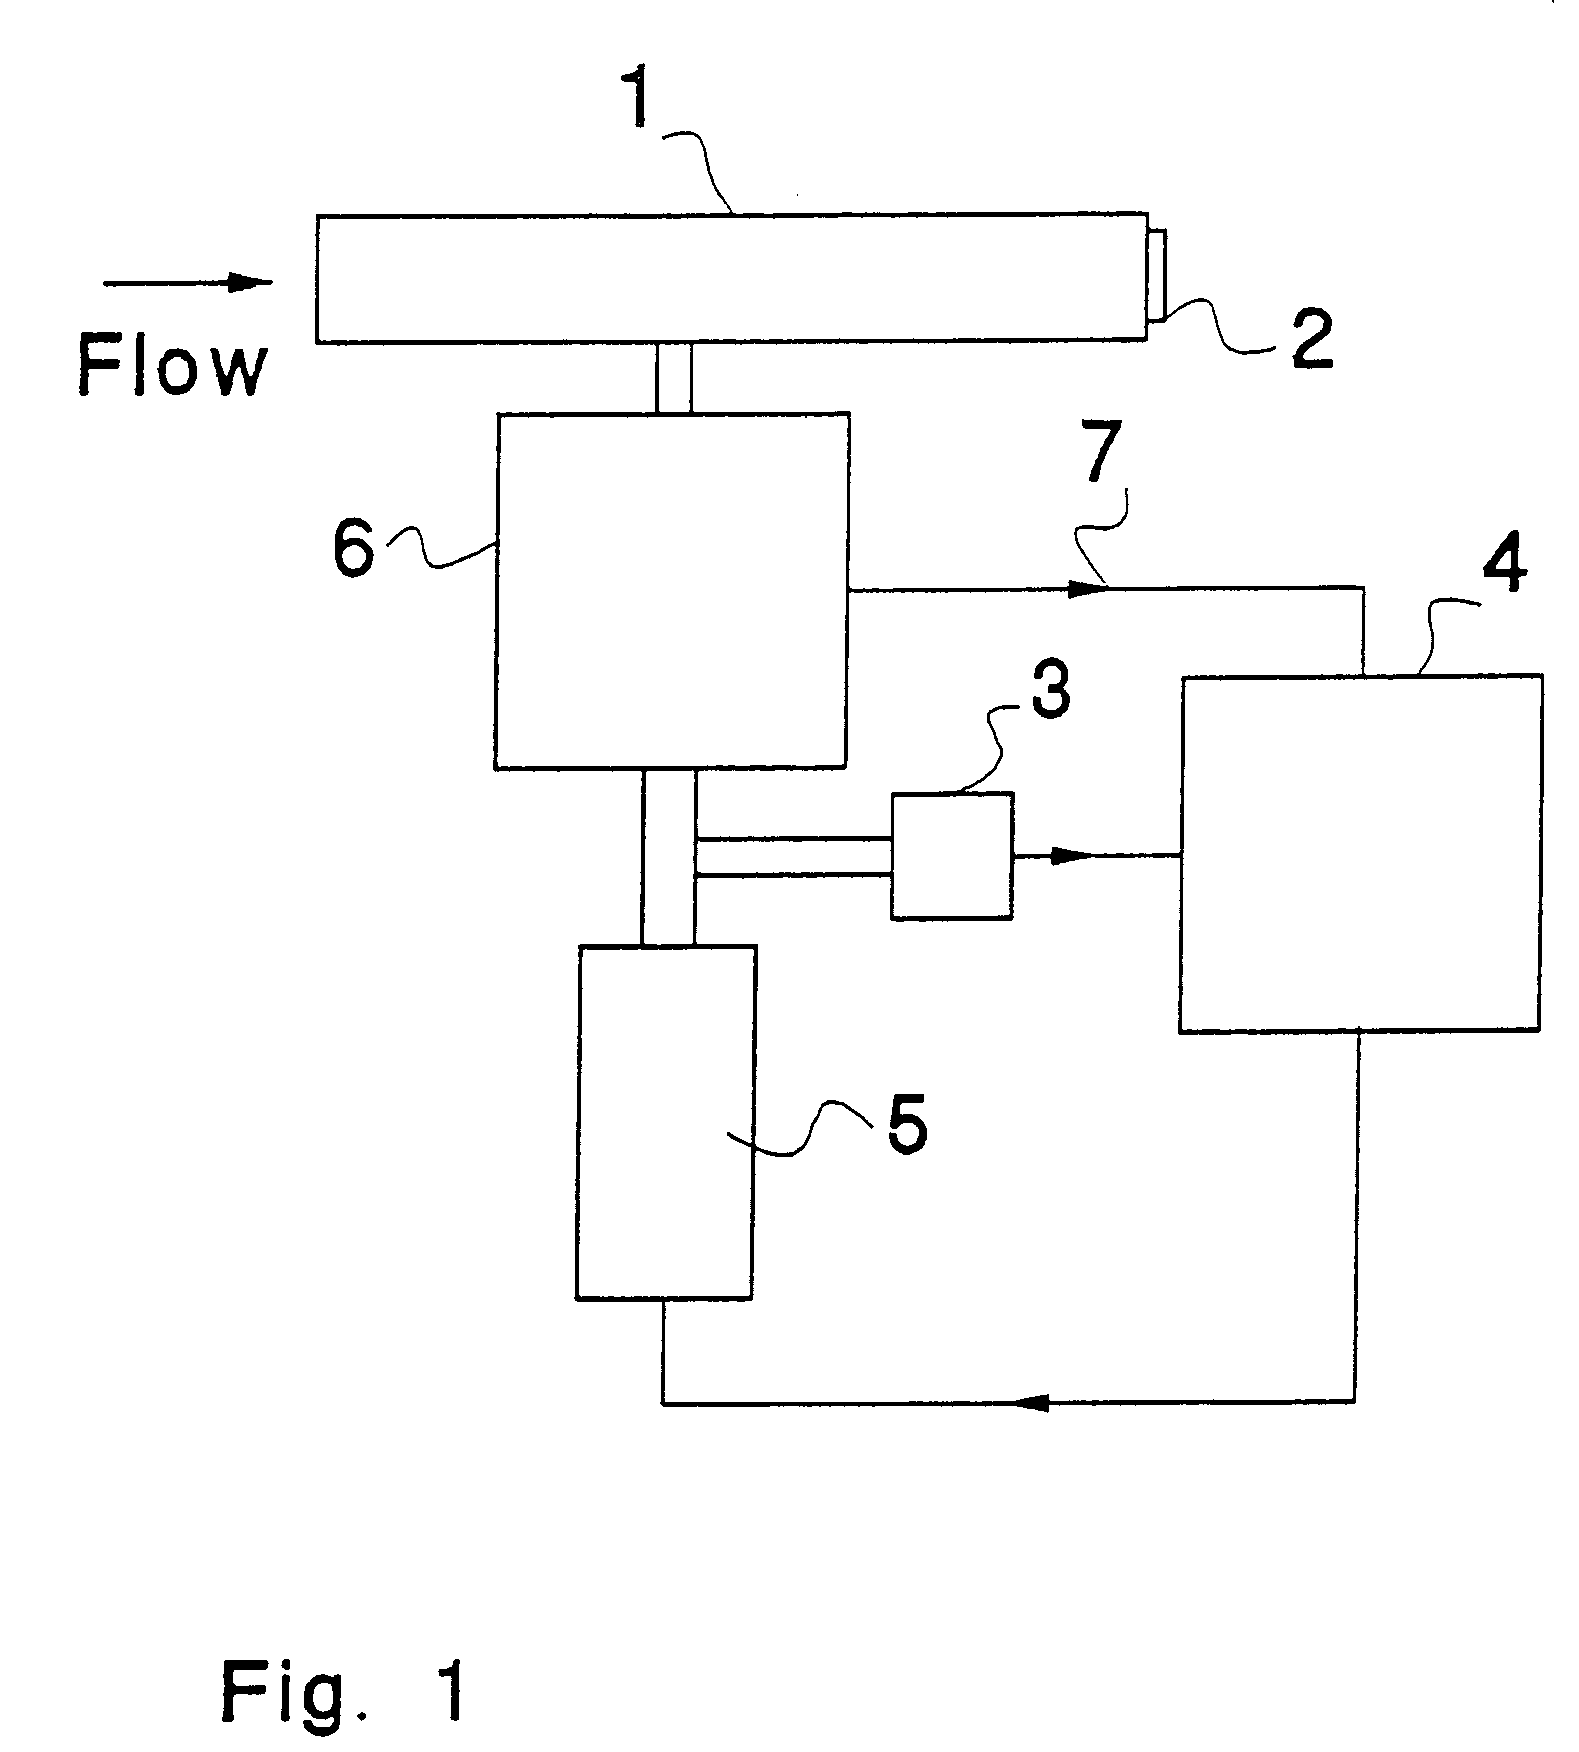 Process for distinguishing wet from dry gas with a breath alcohol measuring device